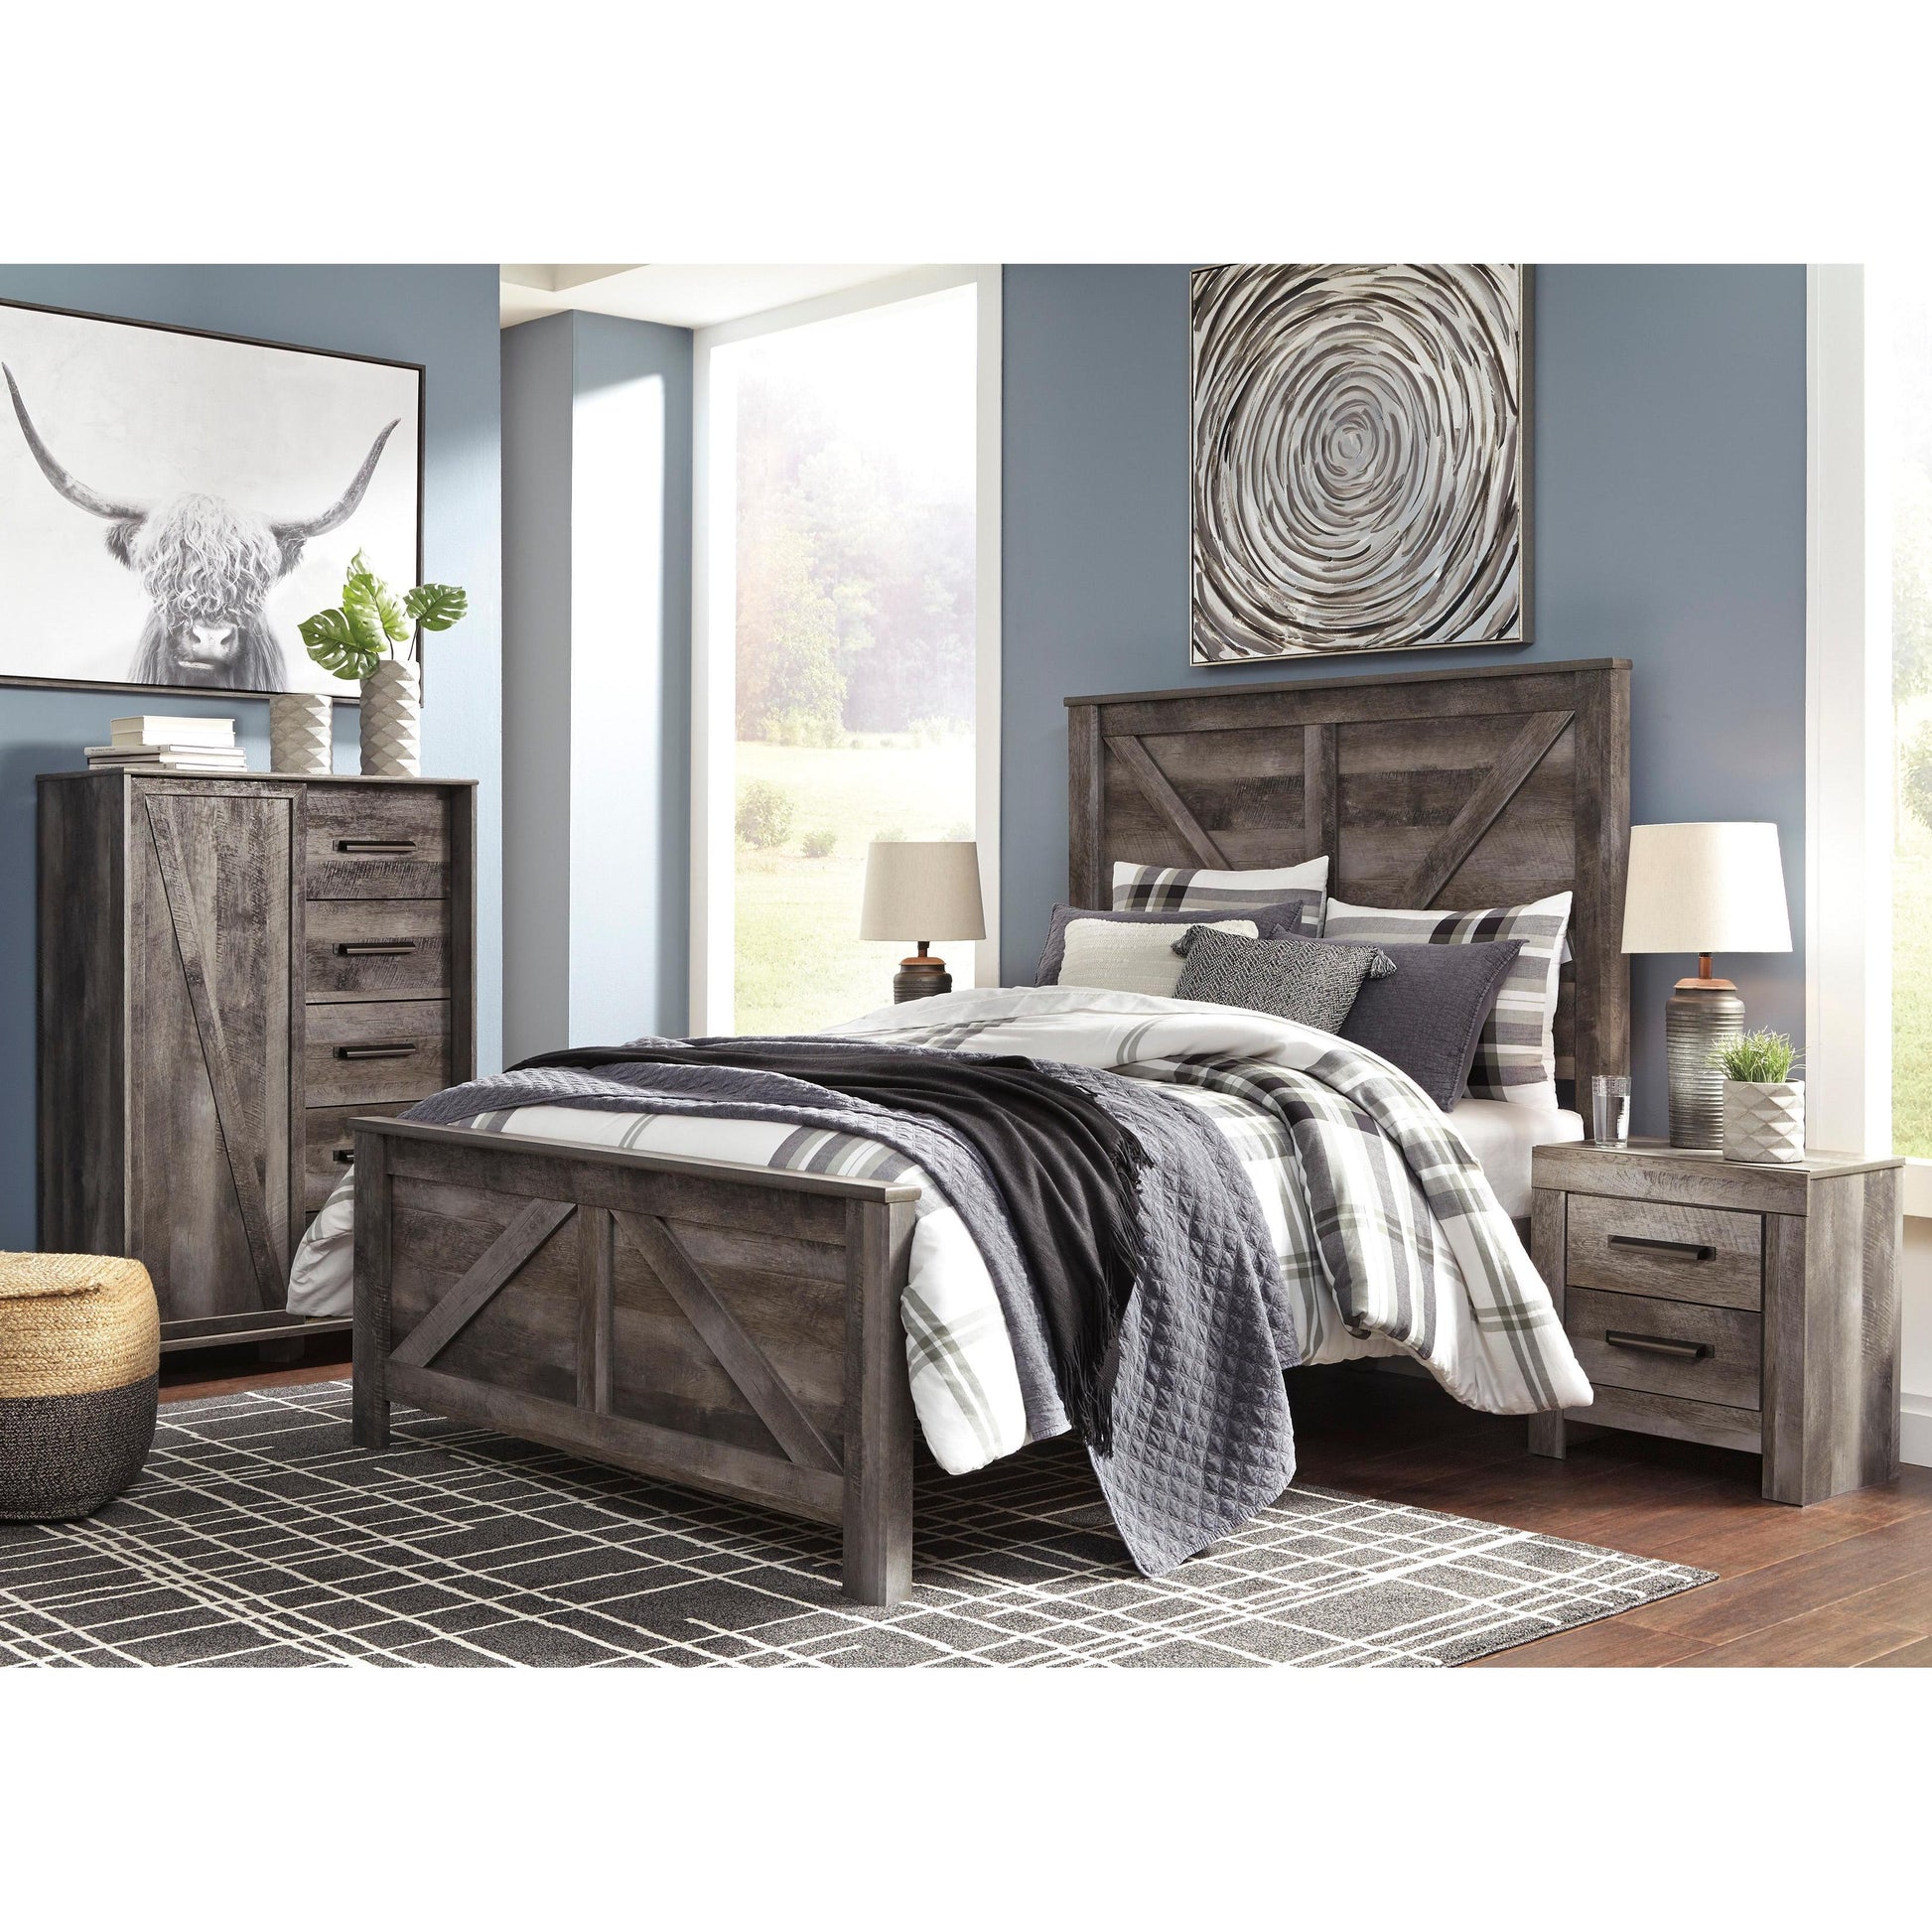 Signature Design by Ashley Wynnlow B440 6 pc Queen Crossbuck Panel Bedroom Set IMAGE 2